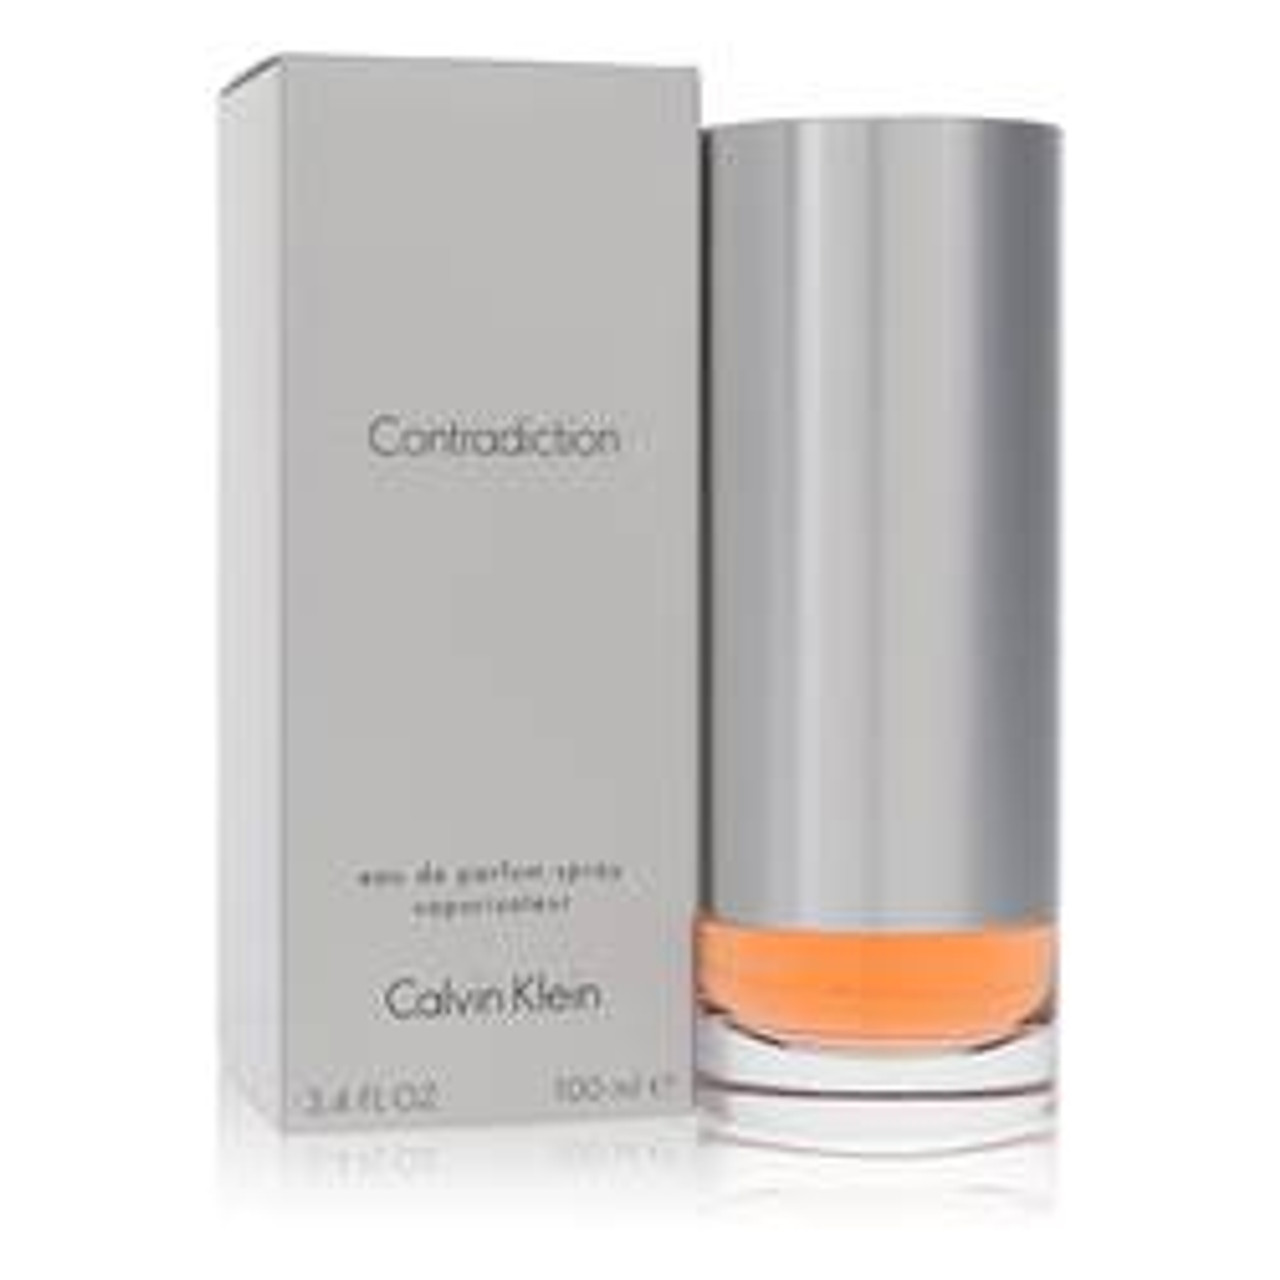 Contradiction Perfume By Calvin Klein Eau De Parfum Spray 3.4 oz for Women - [From 83.00 - Choose pk Qty ] - *Ships from Miami